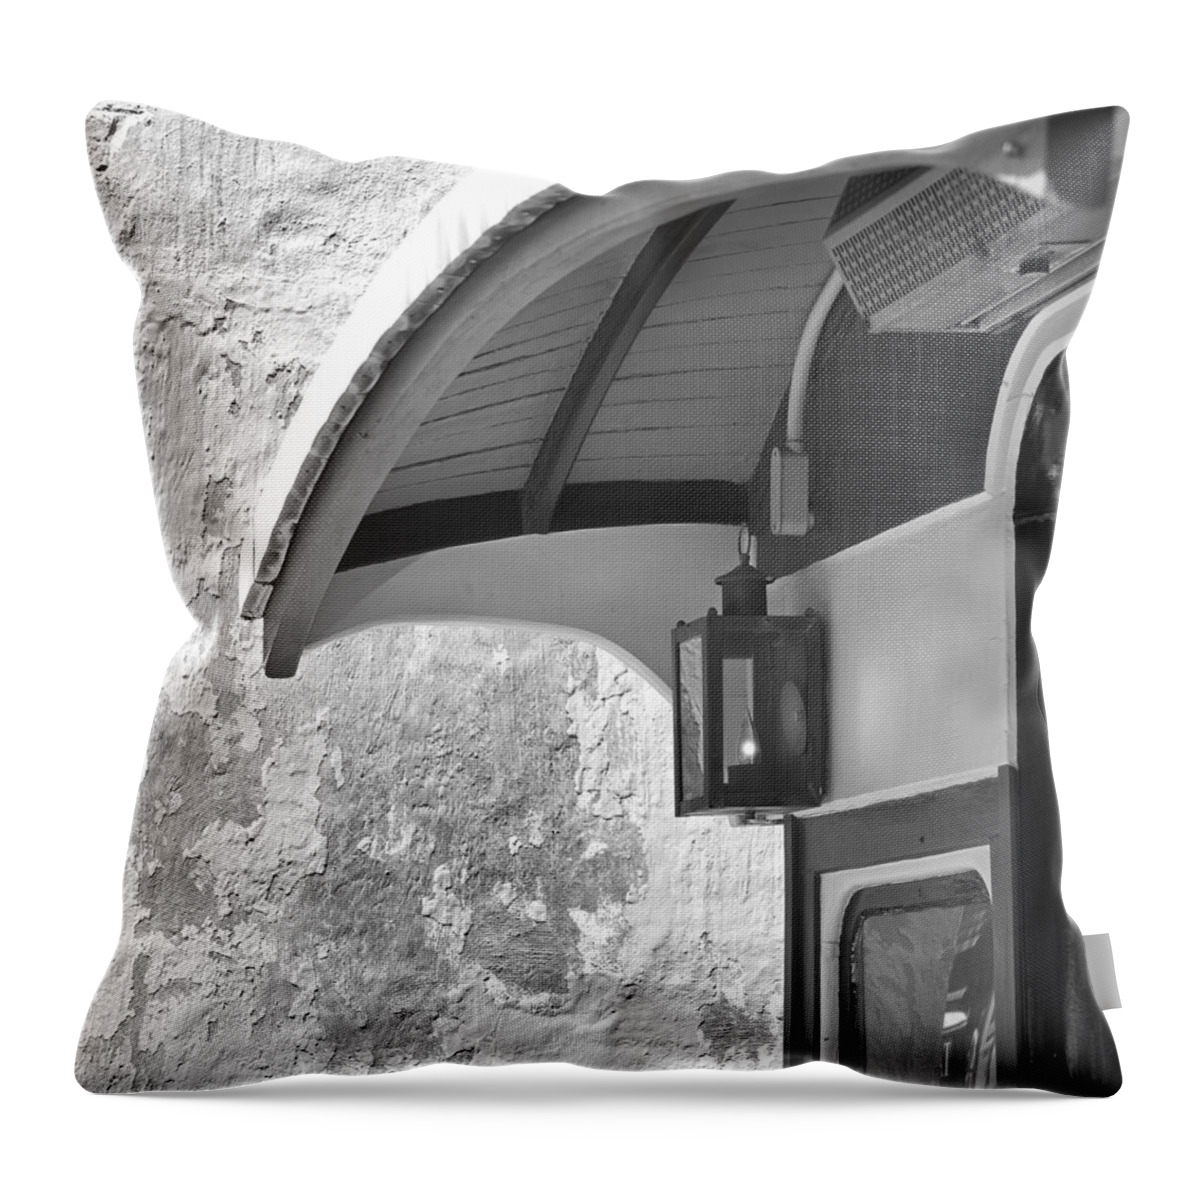 Cable Throw Pillow featuring the photograph The Cable Car Nantucket by Charles Harden